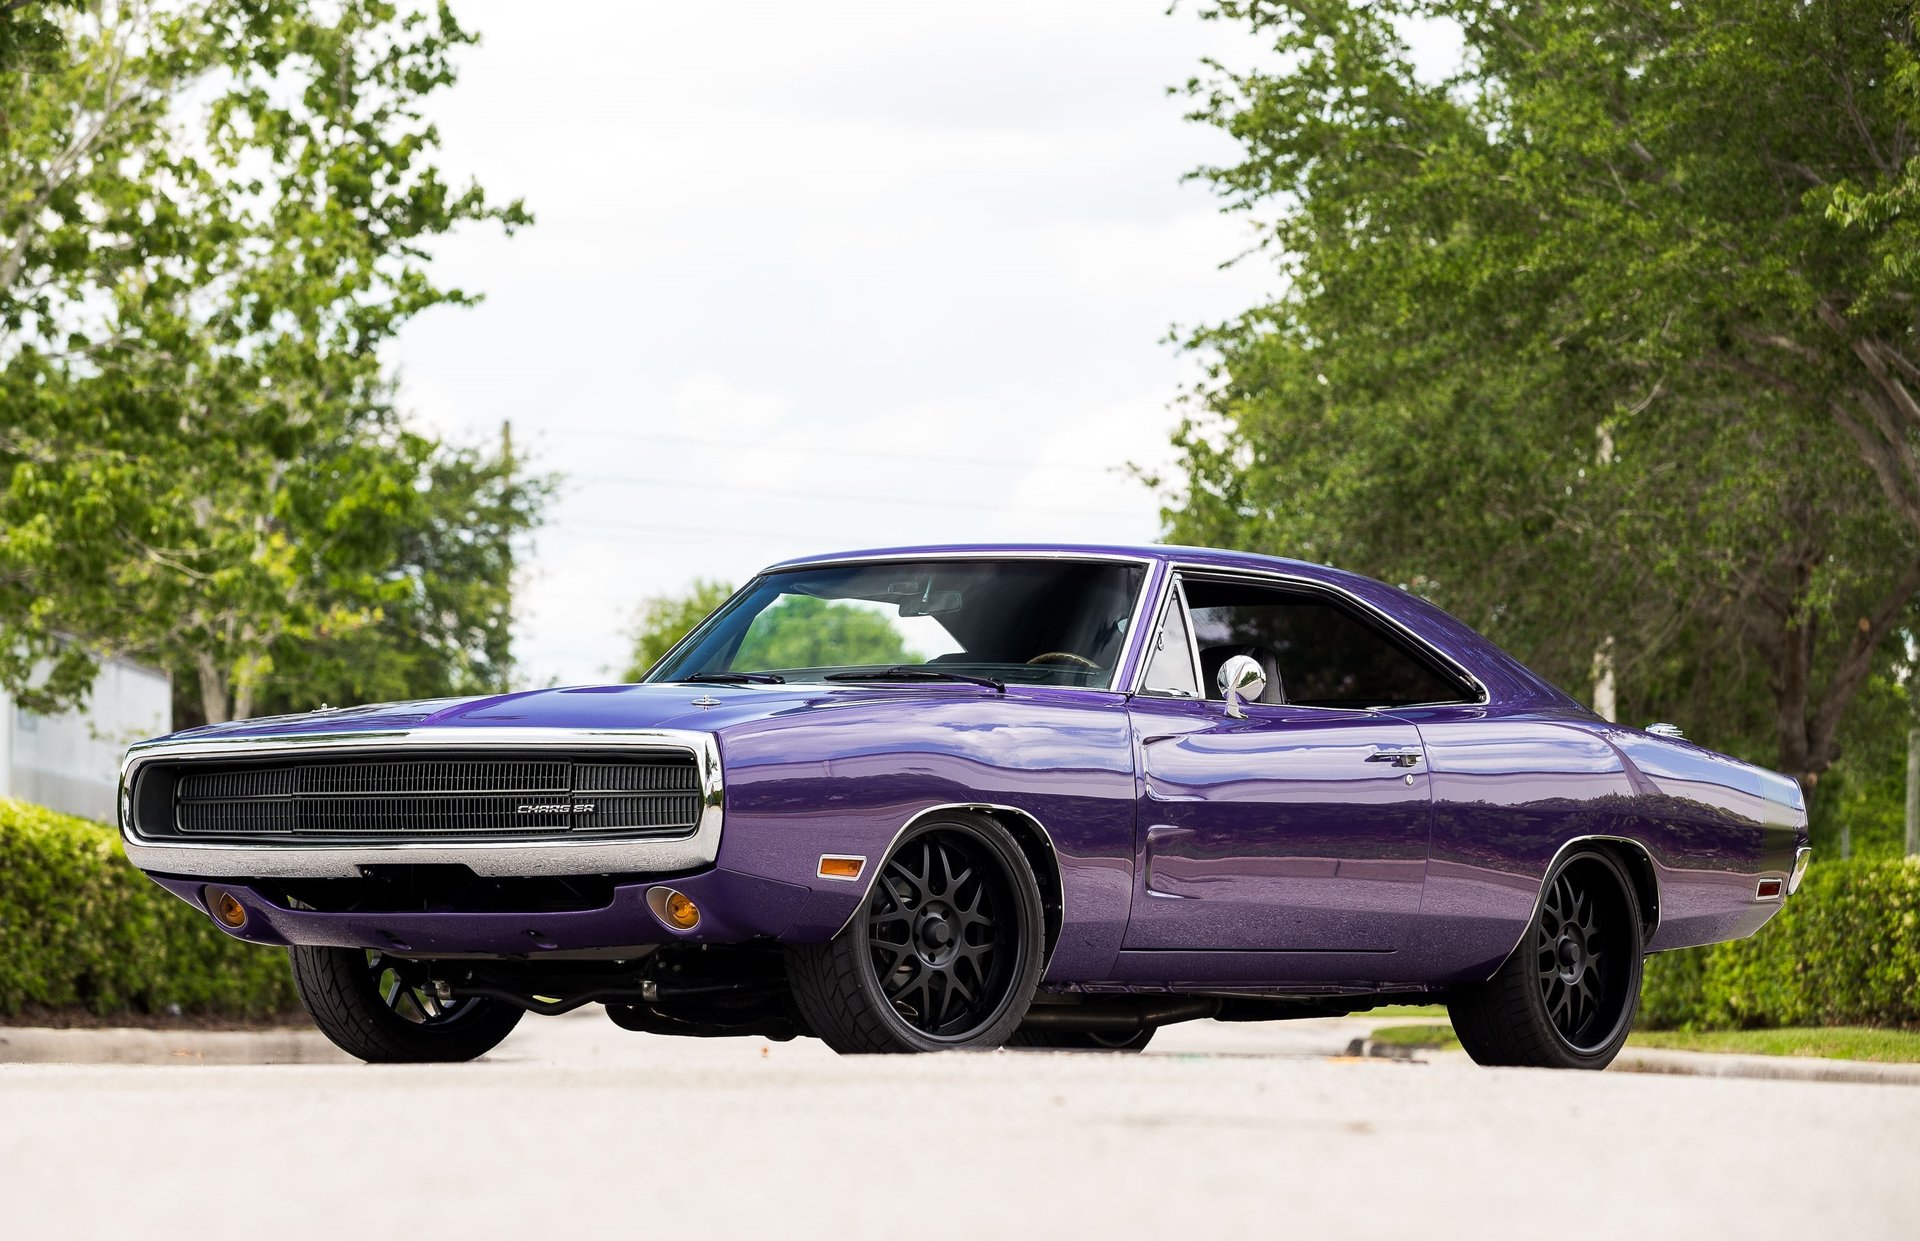 Anca Blog: dodge charger rt 1970 horsepower - 1970 Dodge Charger R\/T